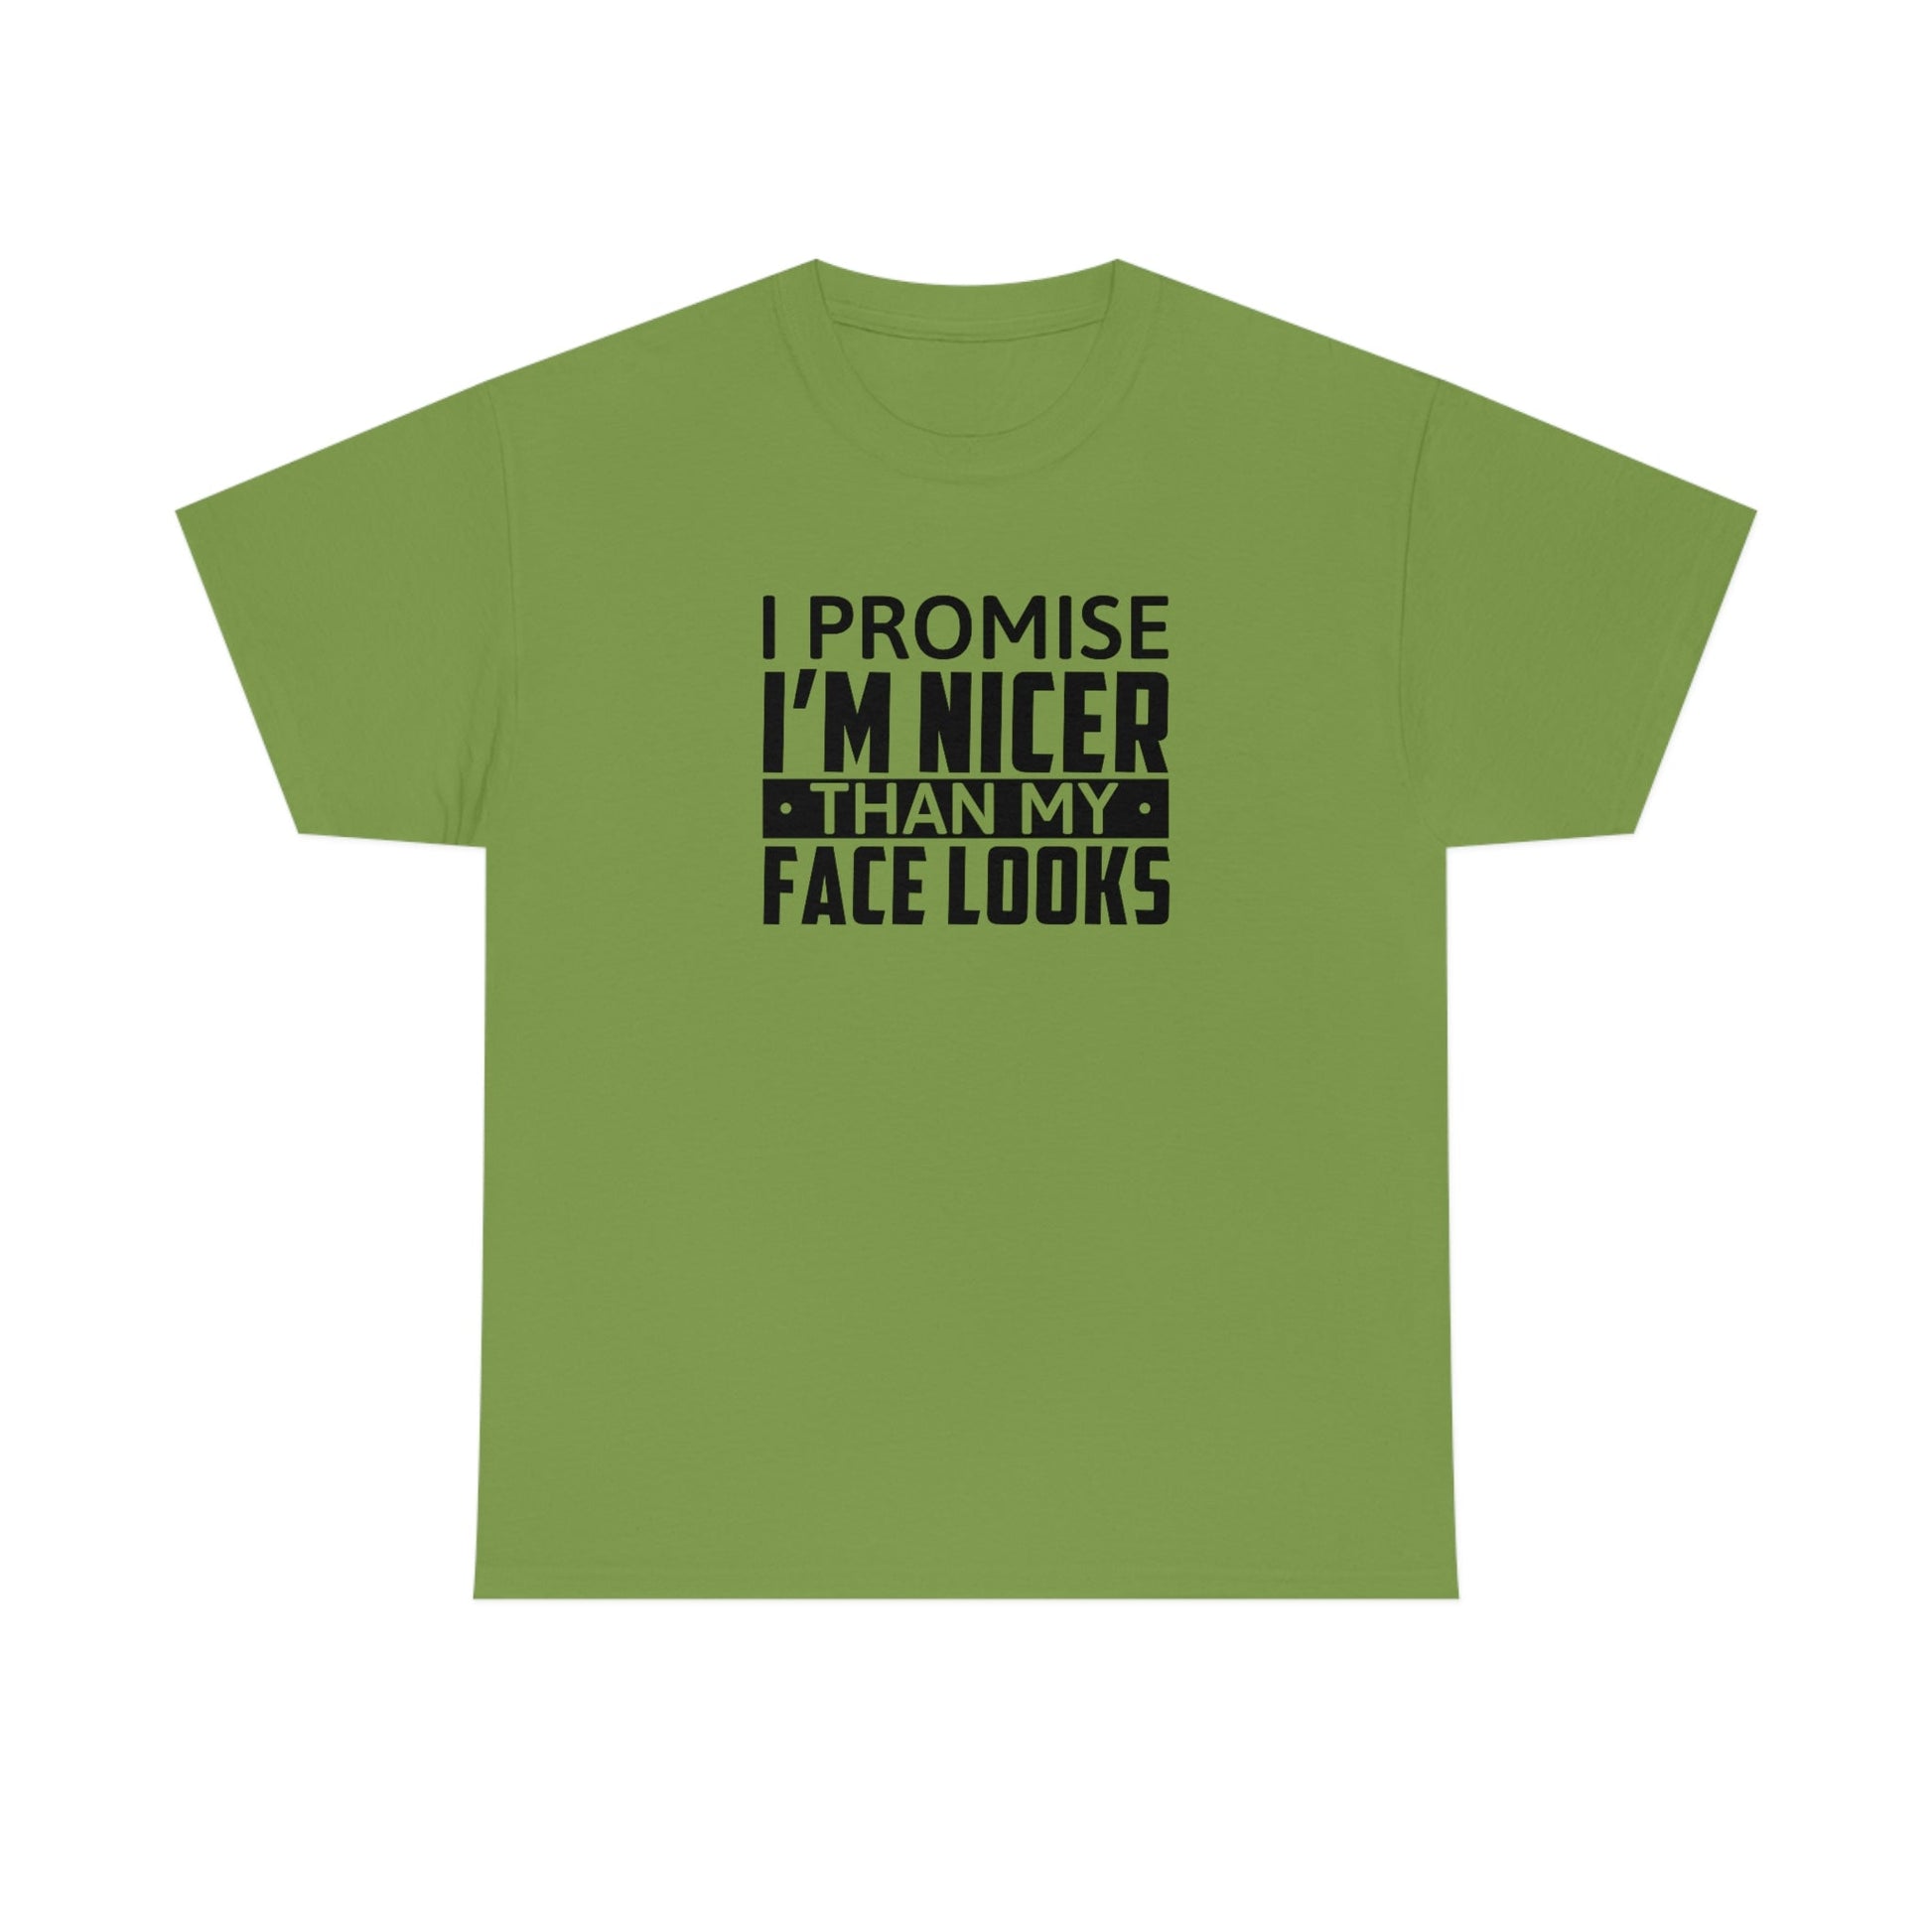 I'm Nicer Than My Face Looks Cotton Tee T-Shirt Pink Sweetheart